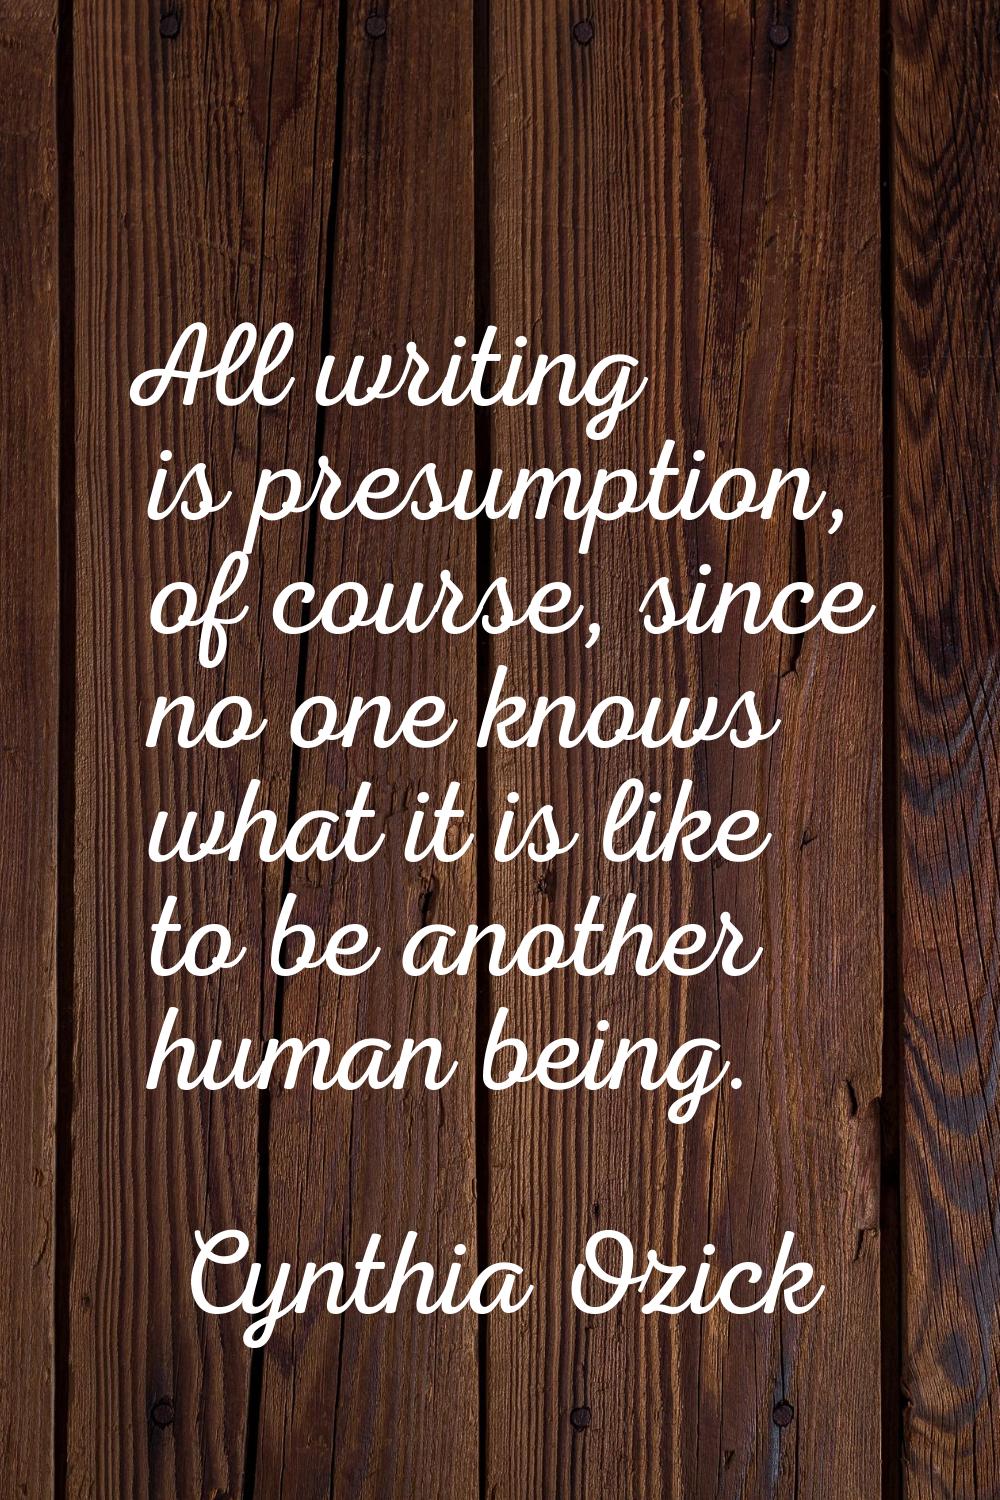 All writing is presumption, of course, since no one knows what it is like to be another human being